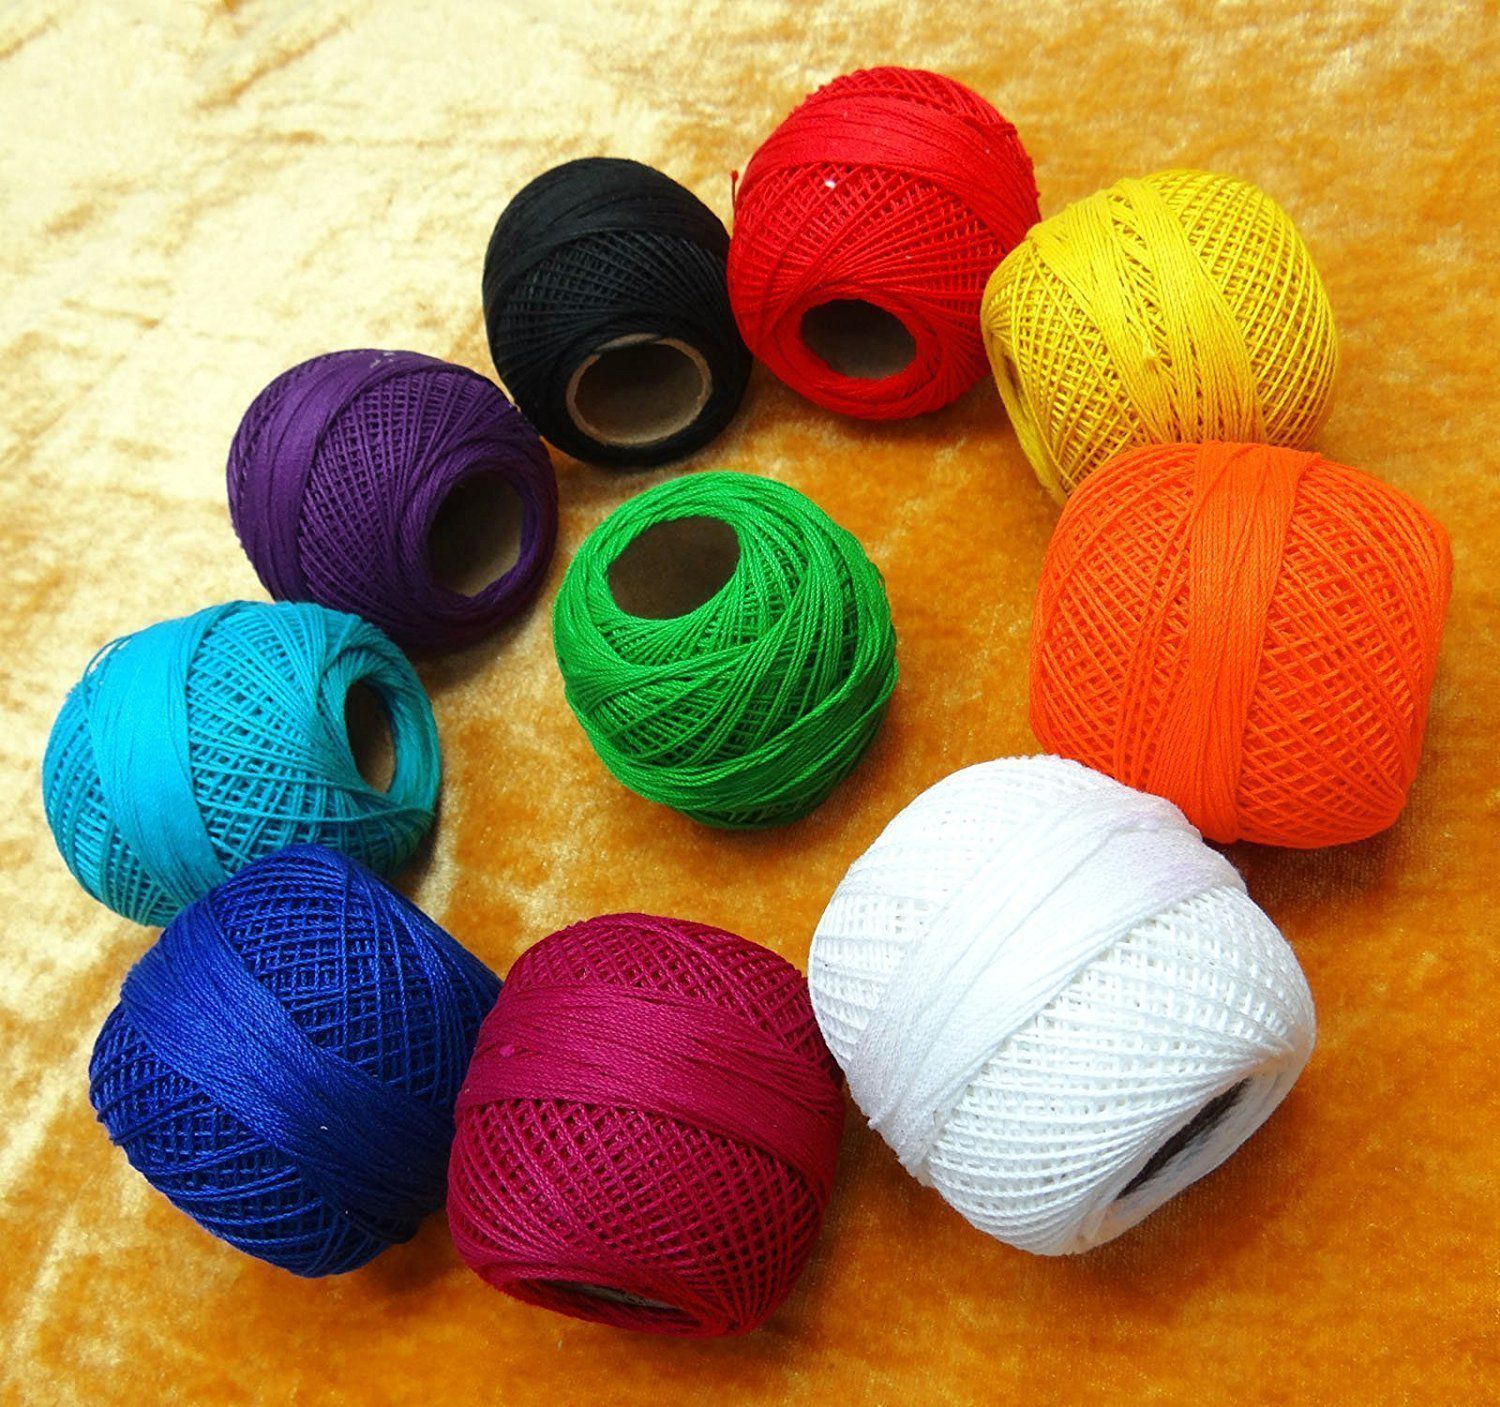 15 pieces*15 g Sequins yarn Shiny yarn The characteristic 